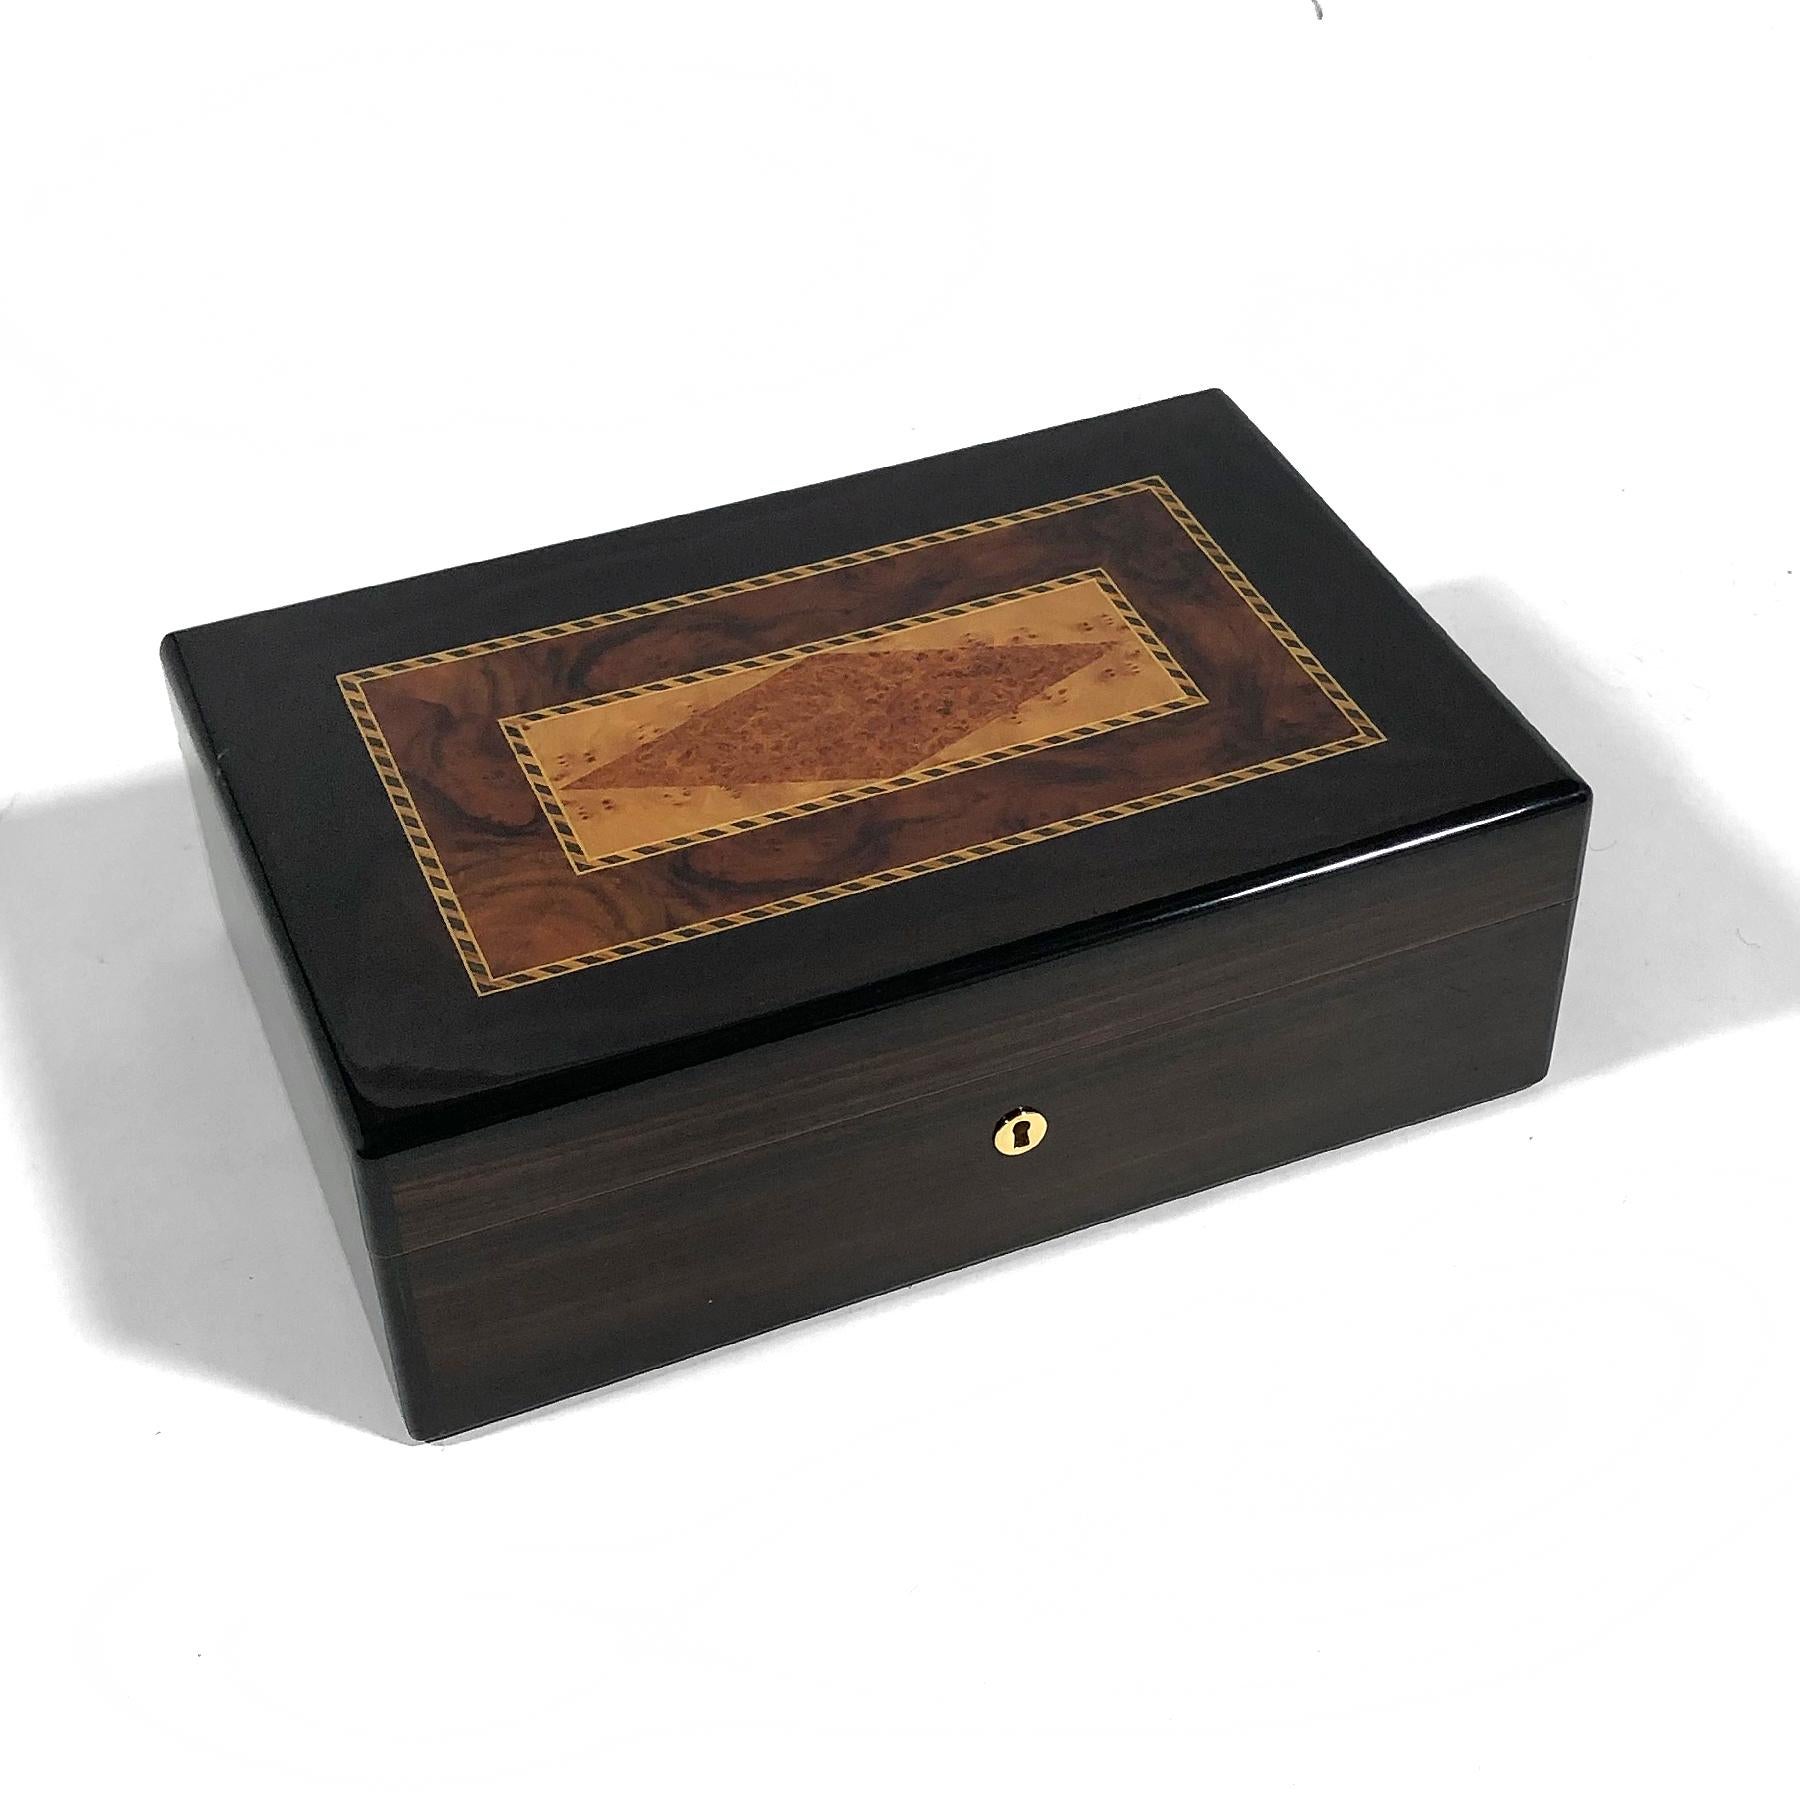 This handsome mahogany humidor made in France by Triade has a beautiful marquetry top made of a variety of woods including highly figured burl.